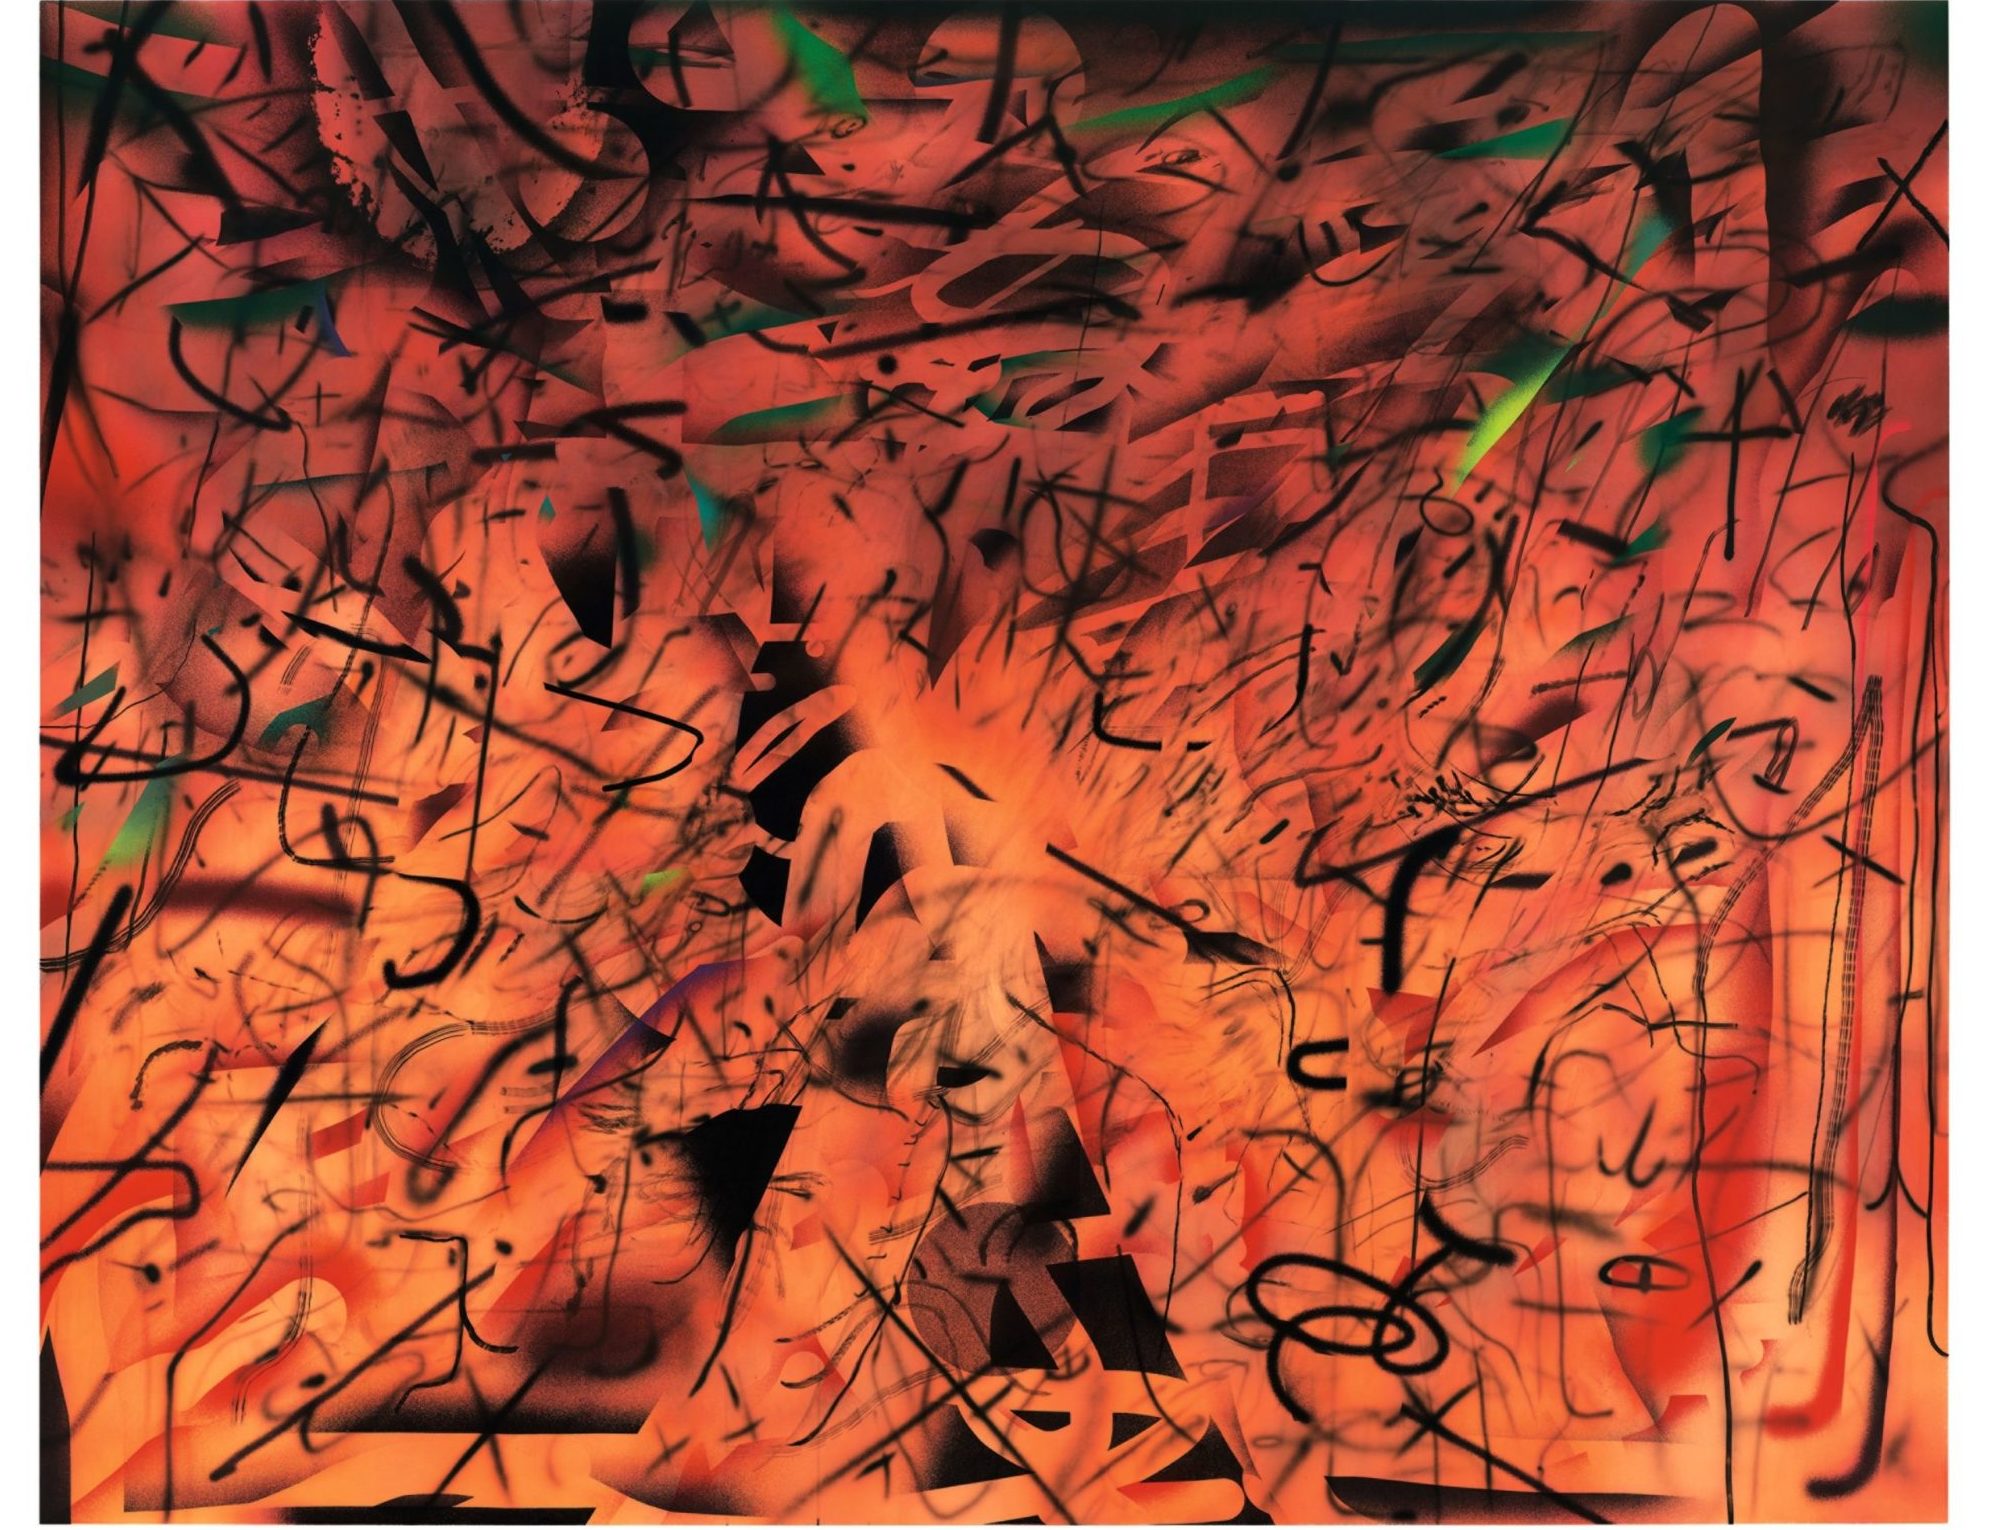 A photograph of Mehretu's painting 